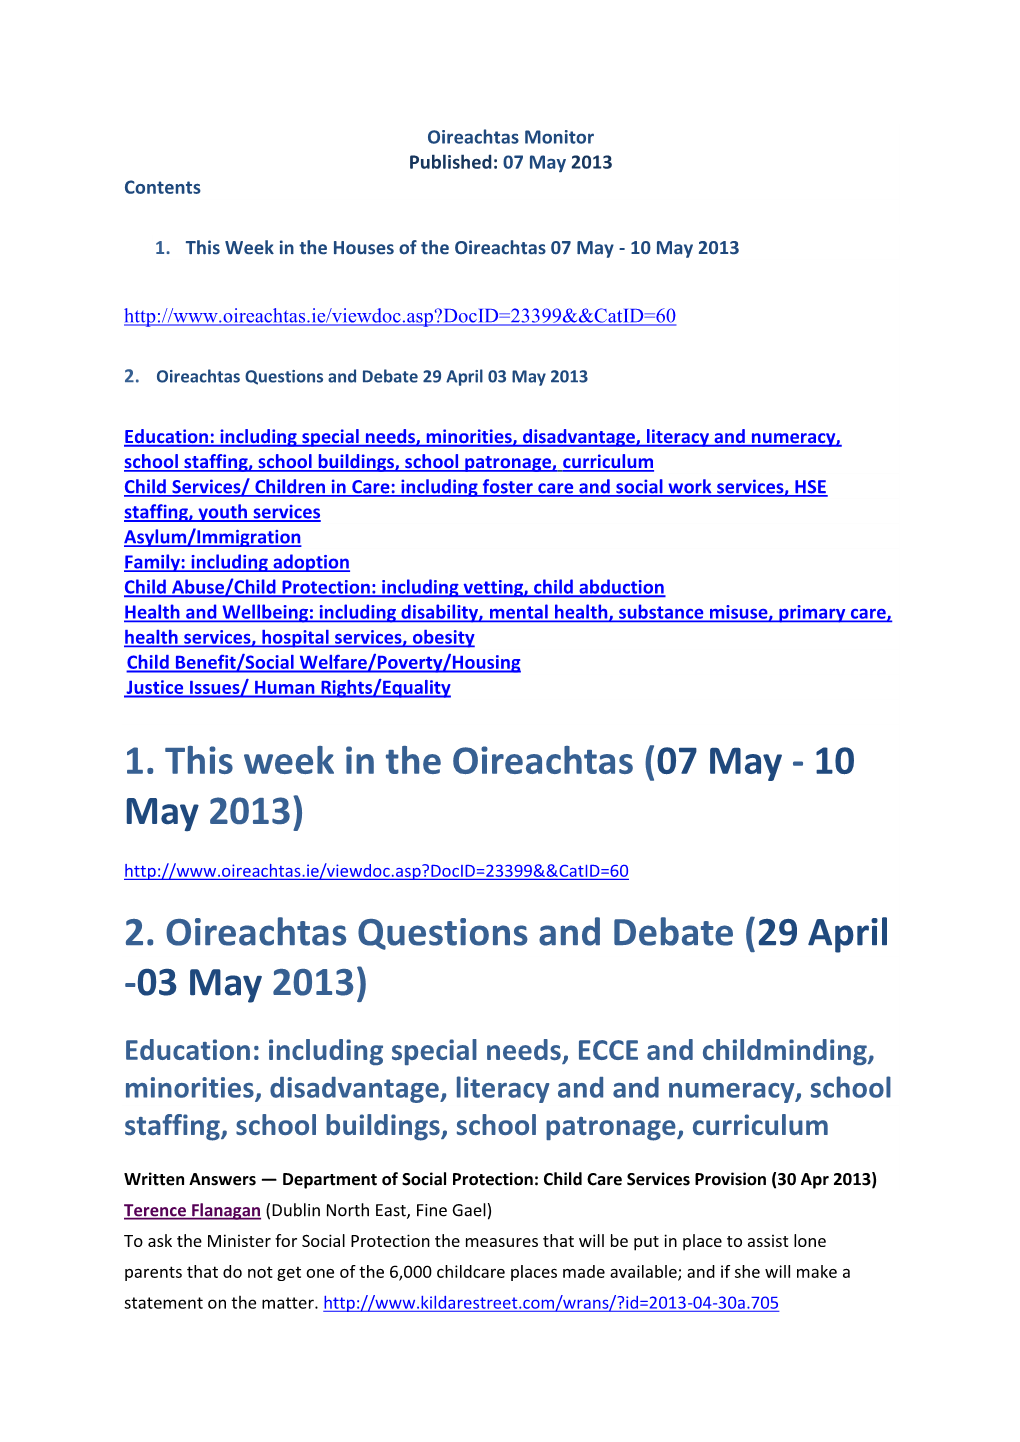 1. This Week in the Oireachtas (07 May - 10 May 2013) 2